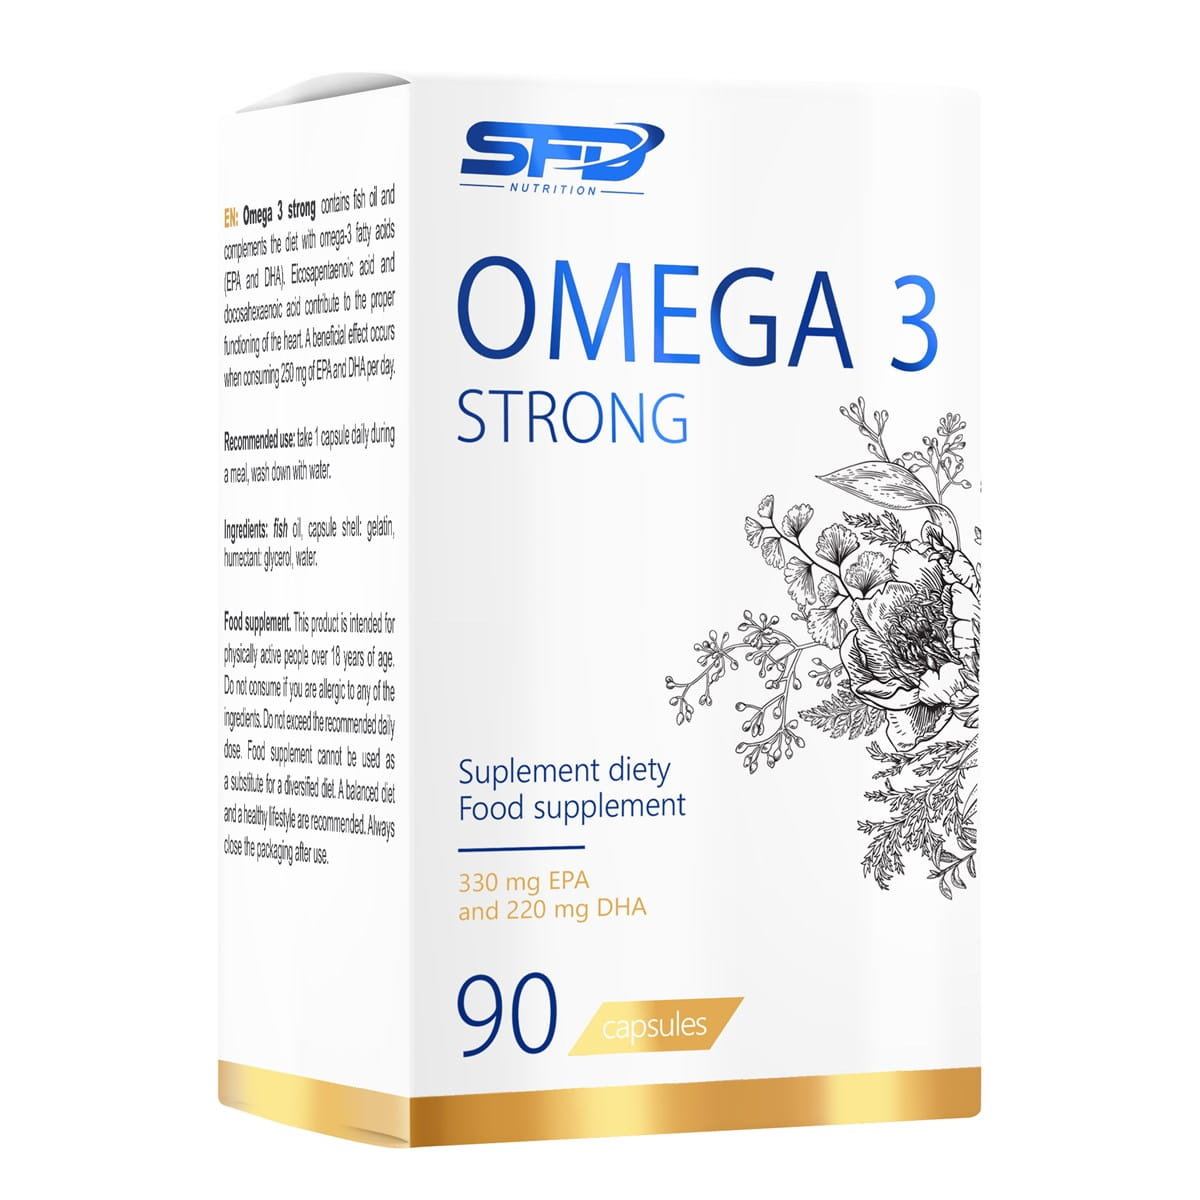 SFD NUTRITION Omega 3 Strong 90softgels